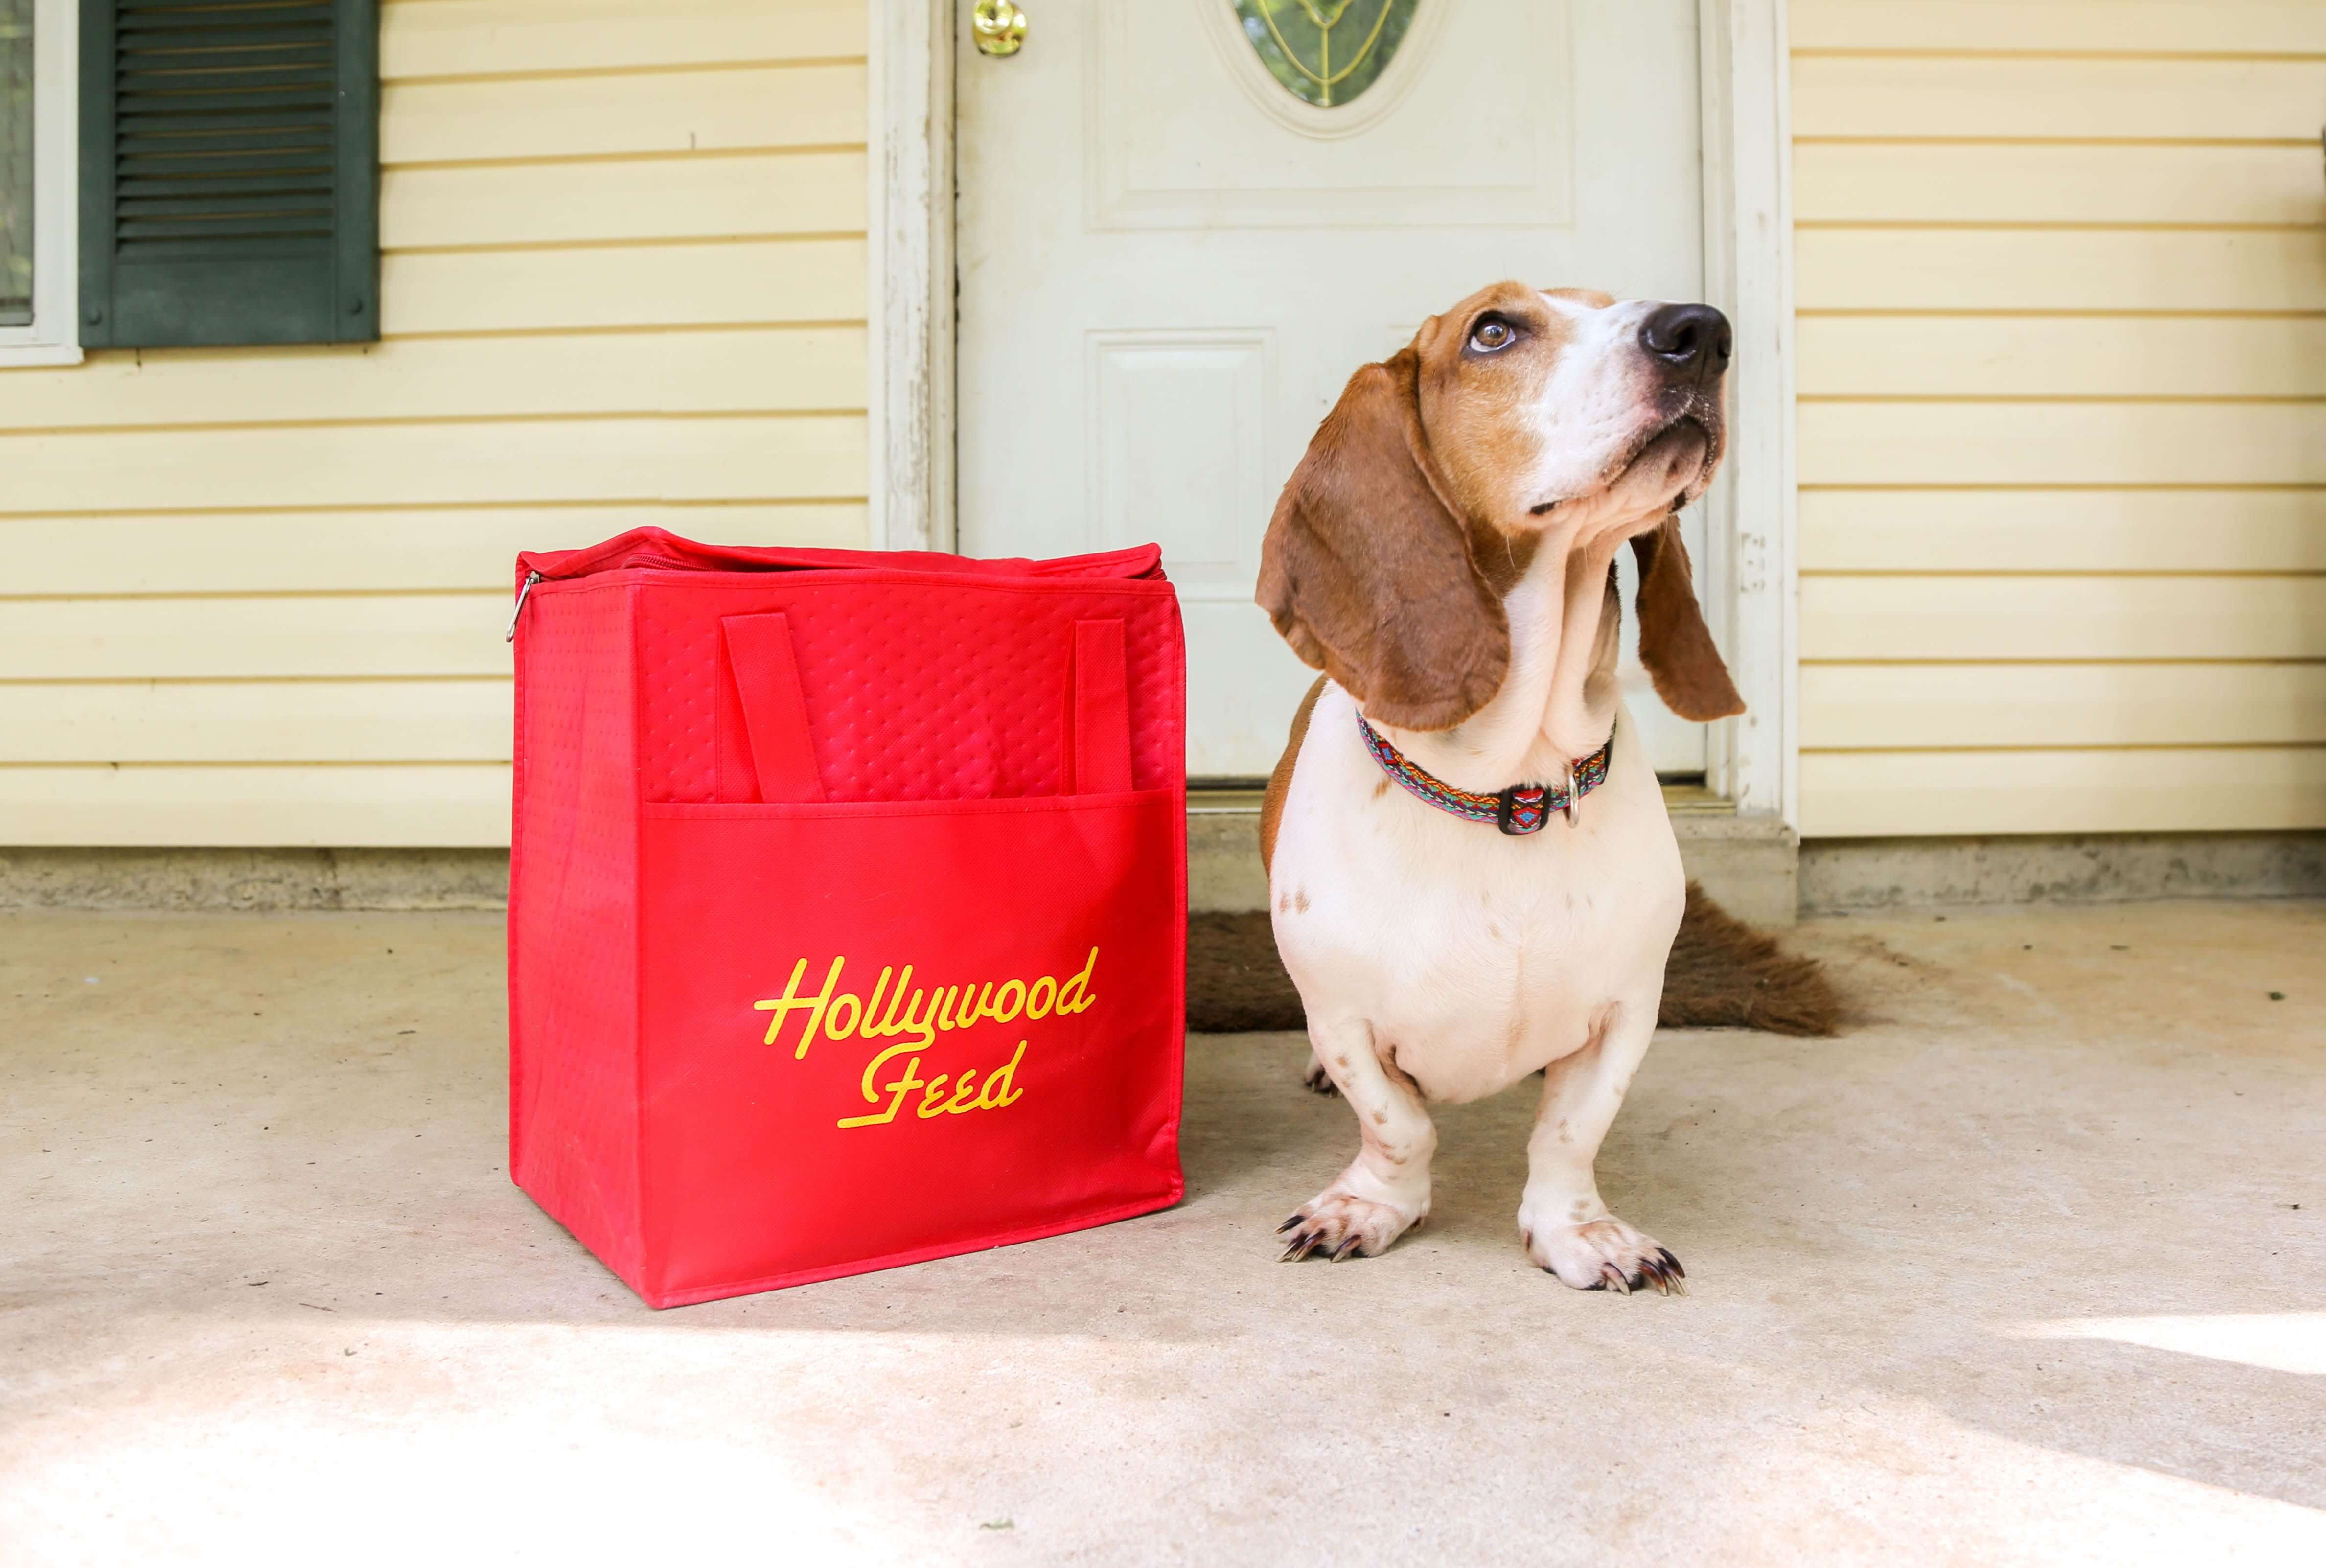 Dog with Delivered Goods